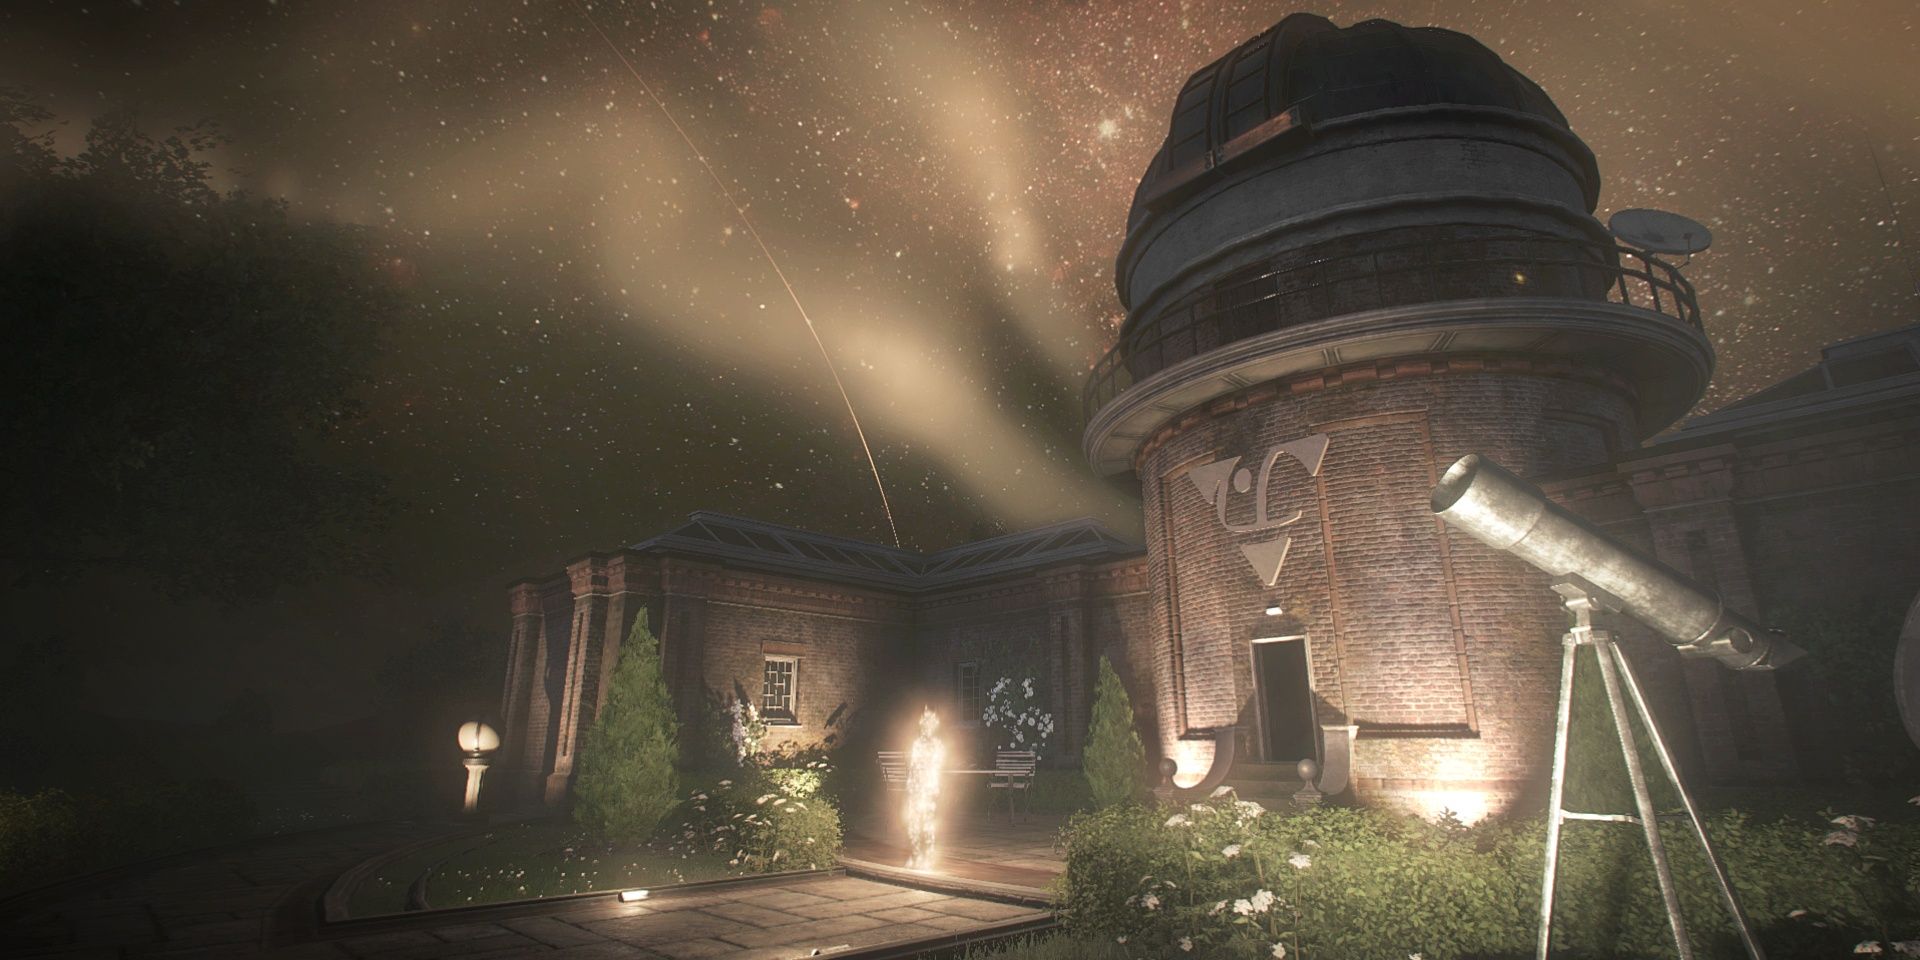 The observatory in Everybody's Gone to the Rapture